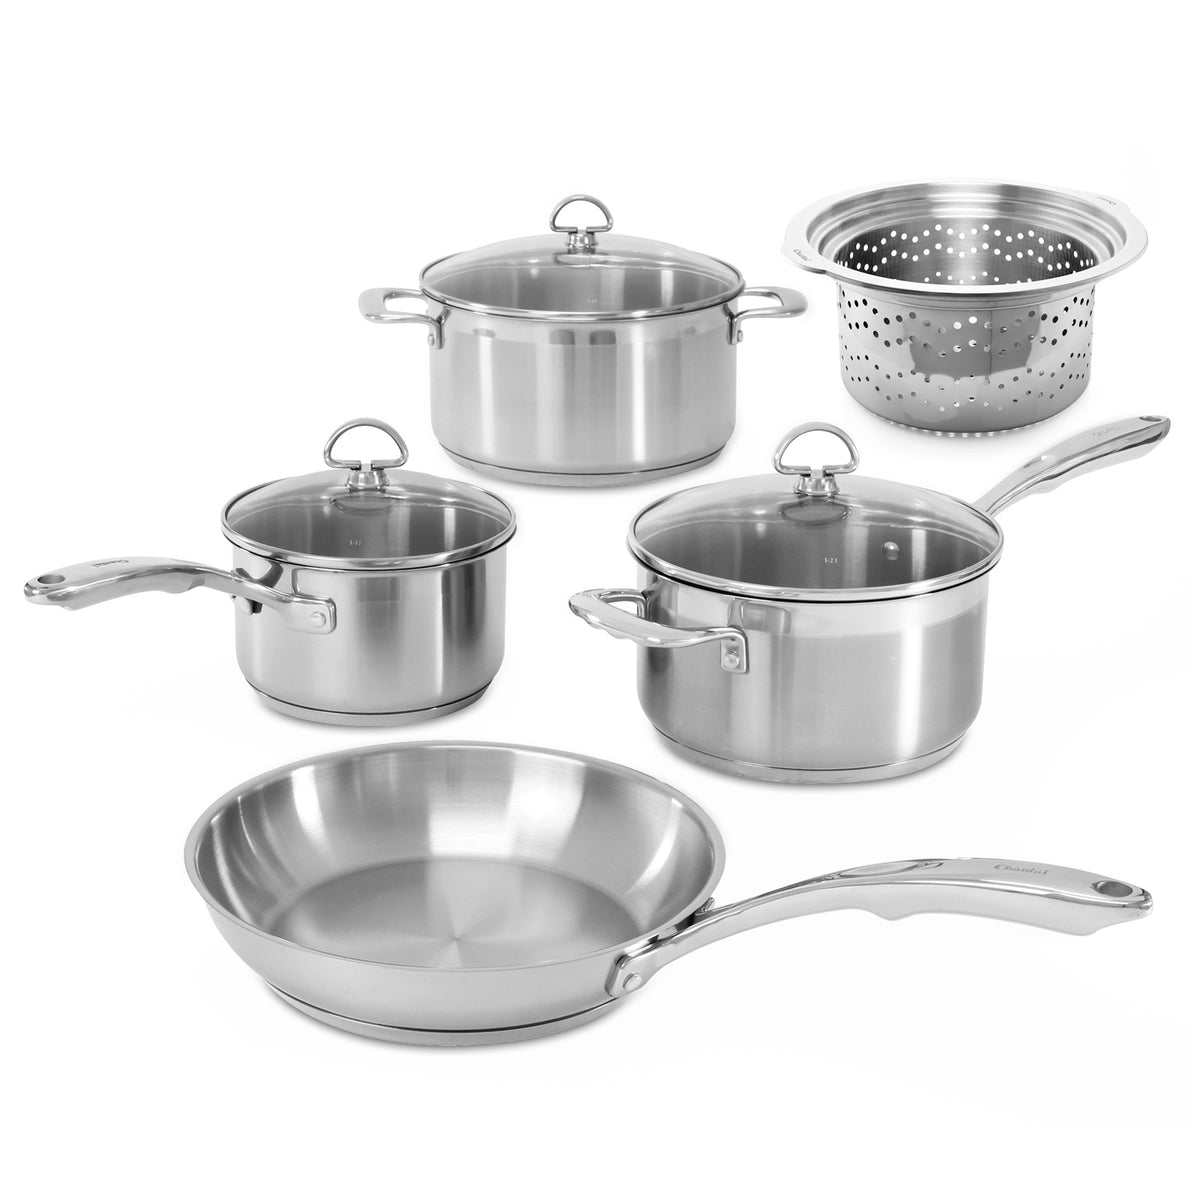 Cookware Set Kitchen Stainless Steel 9-Piece Cooking Pot Set,Induction  Safe,Non Stick Saucepan,Casserole with Glass lid (Silver)